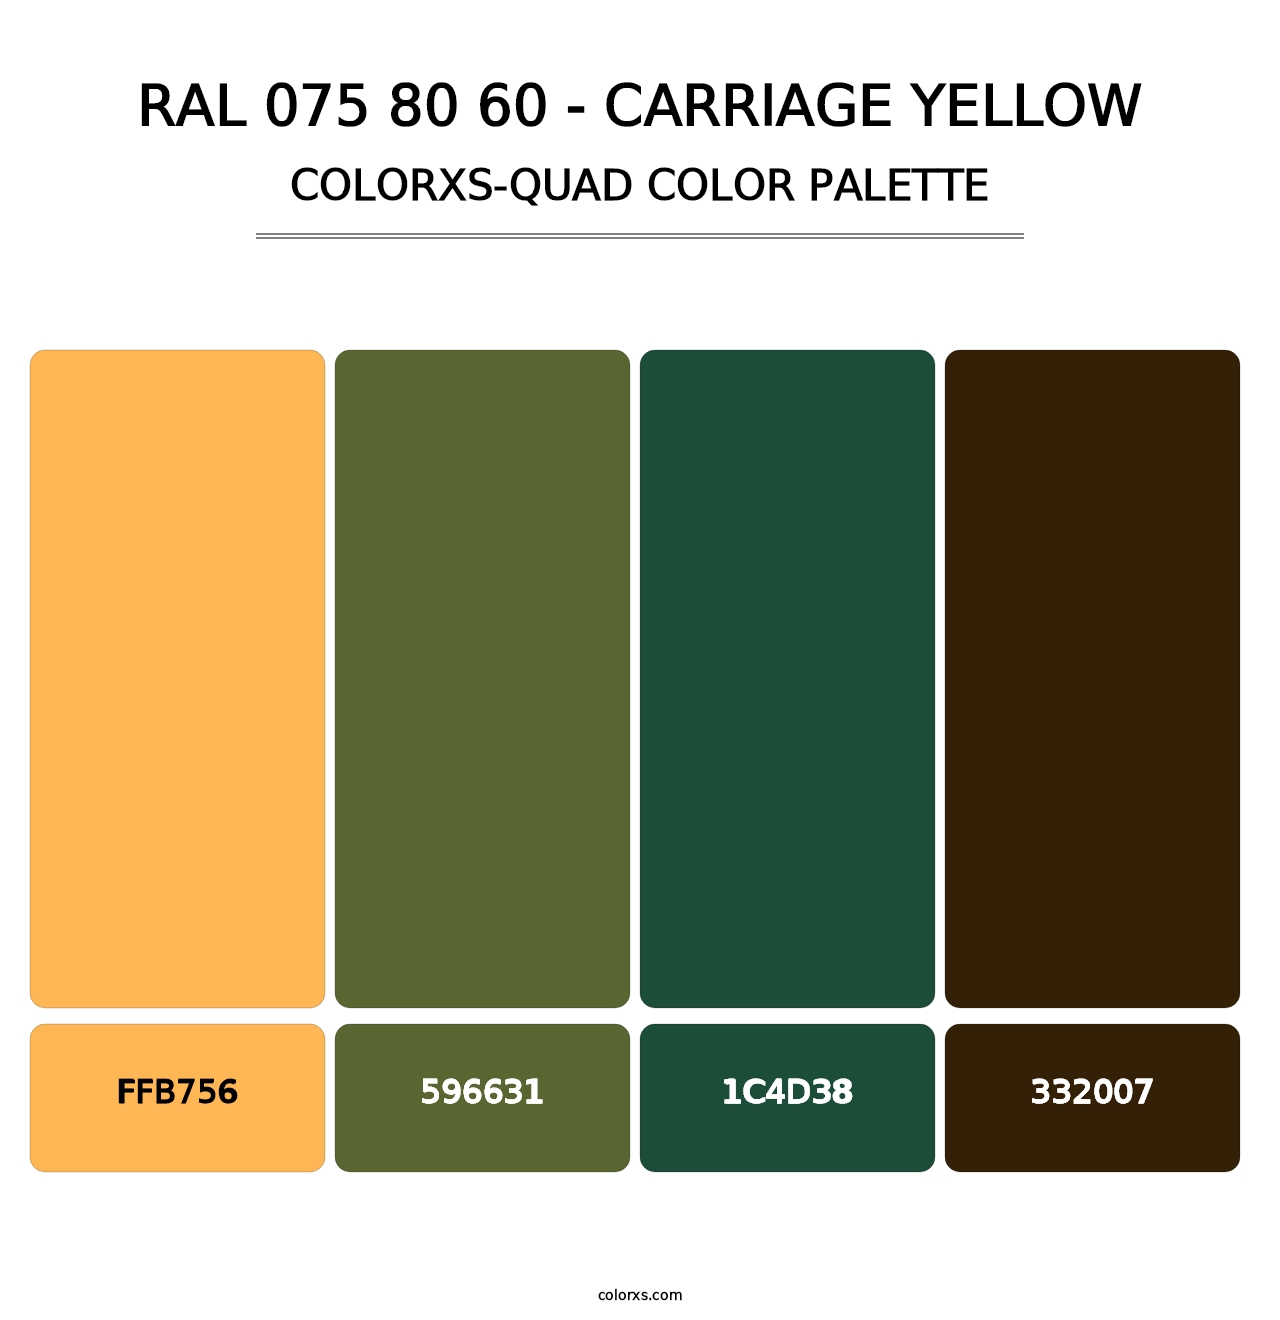 RAL 075 80 60 - Carriage Yellow - Colorxs Quad Palette